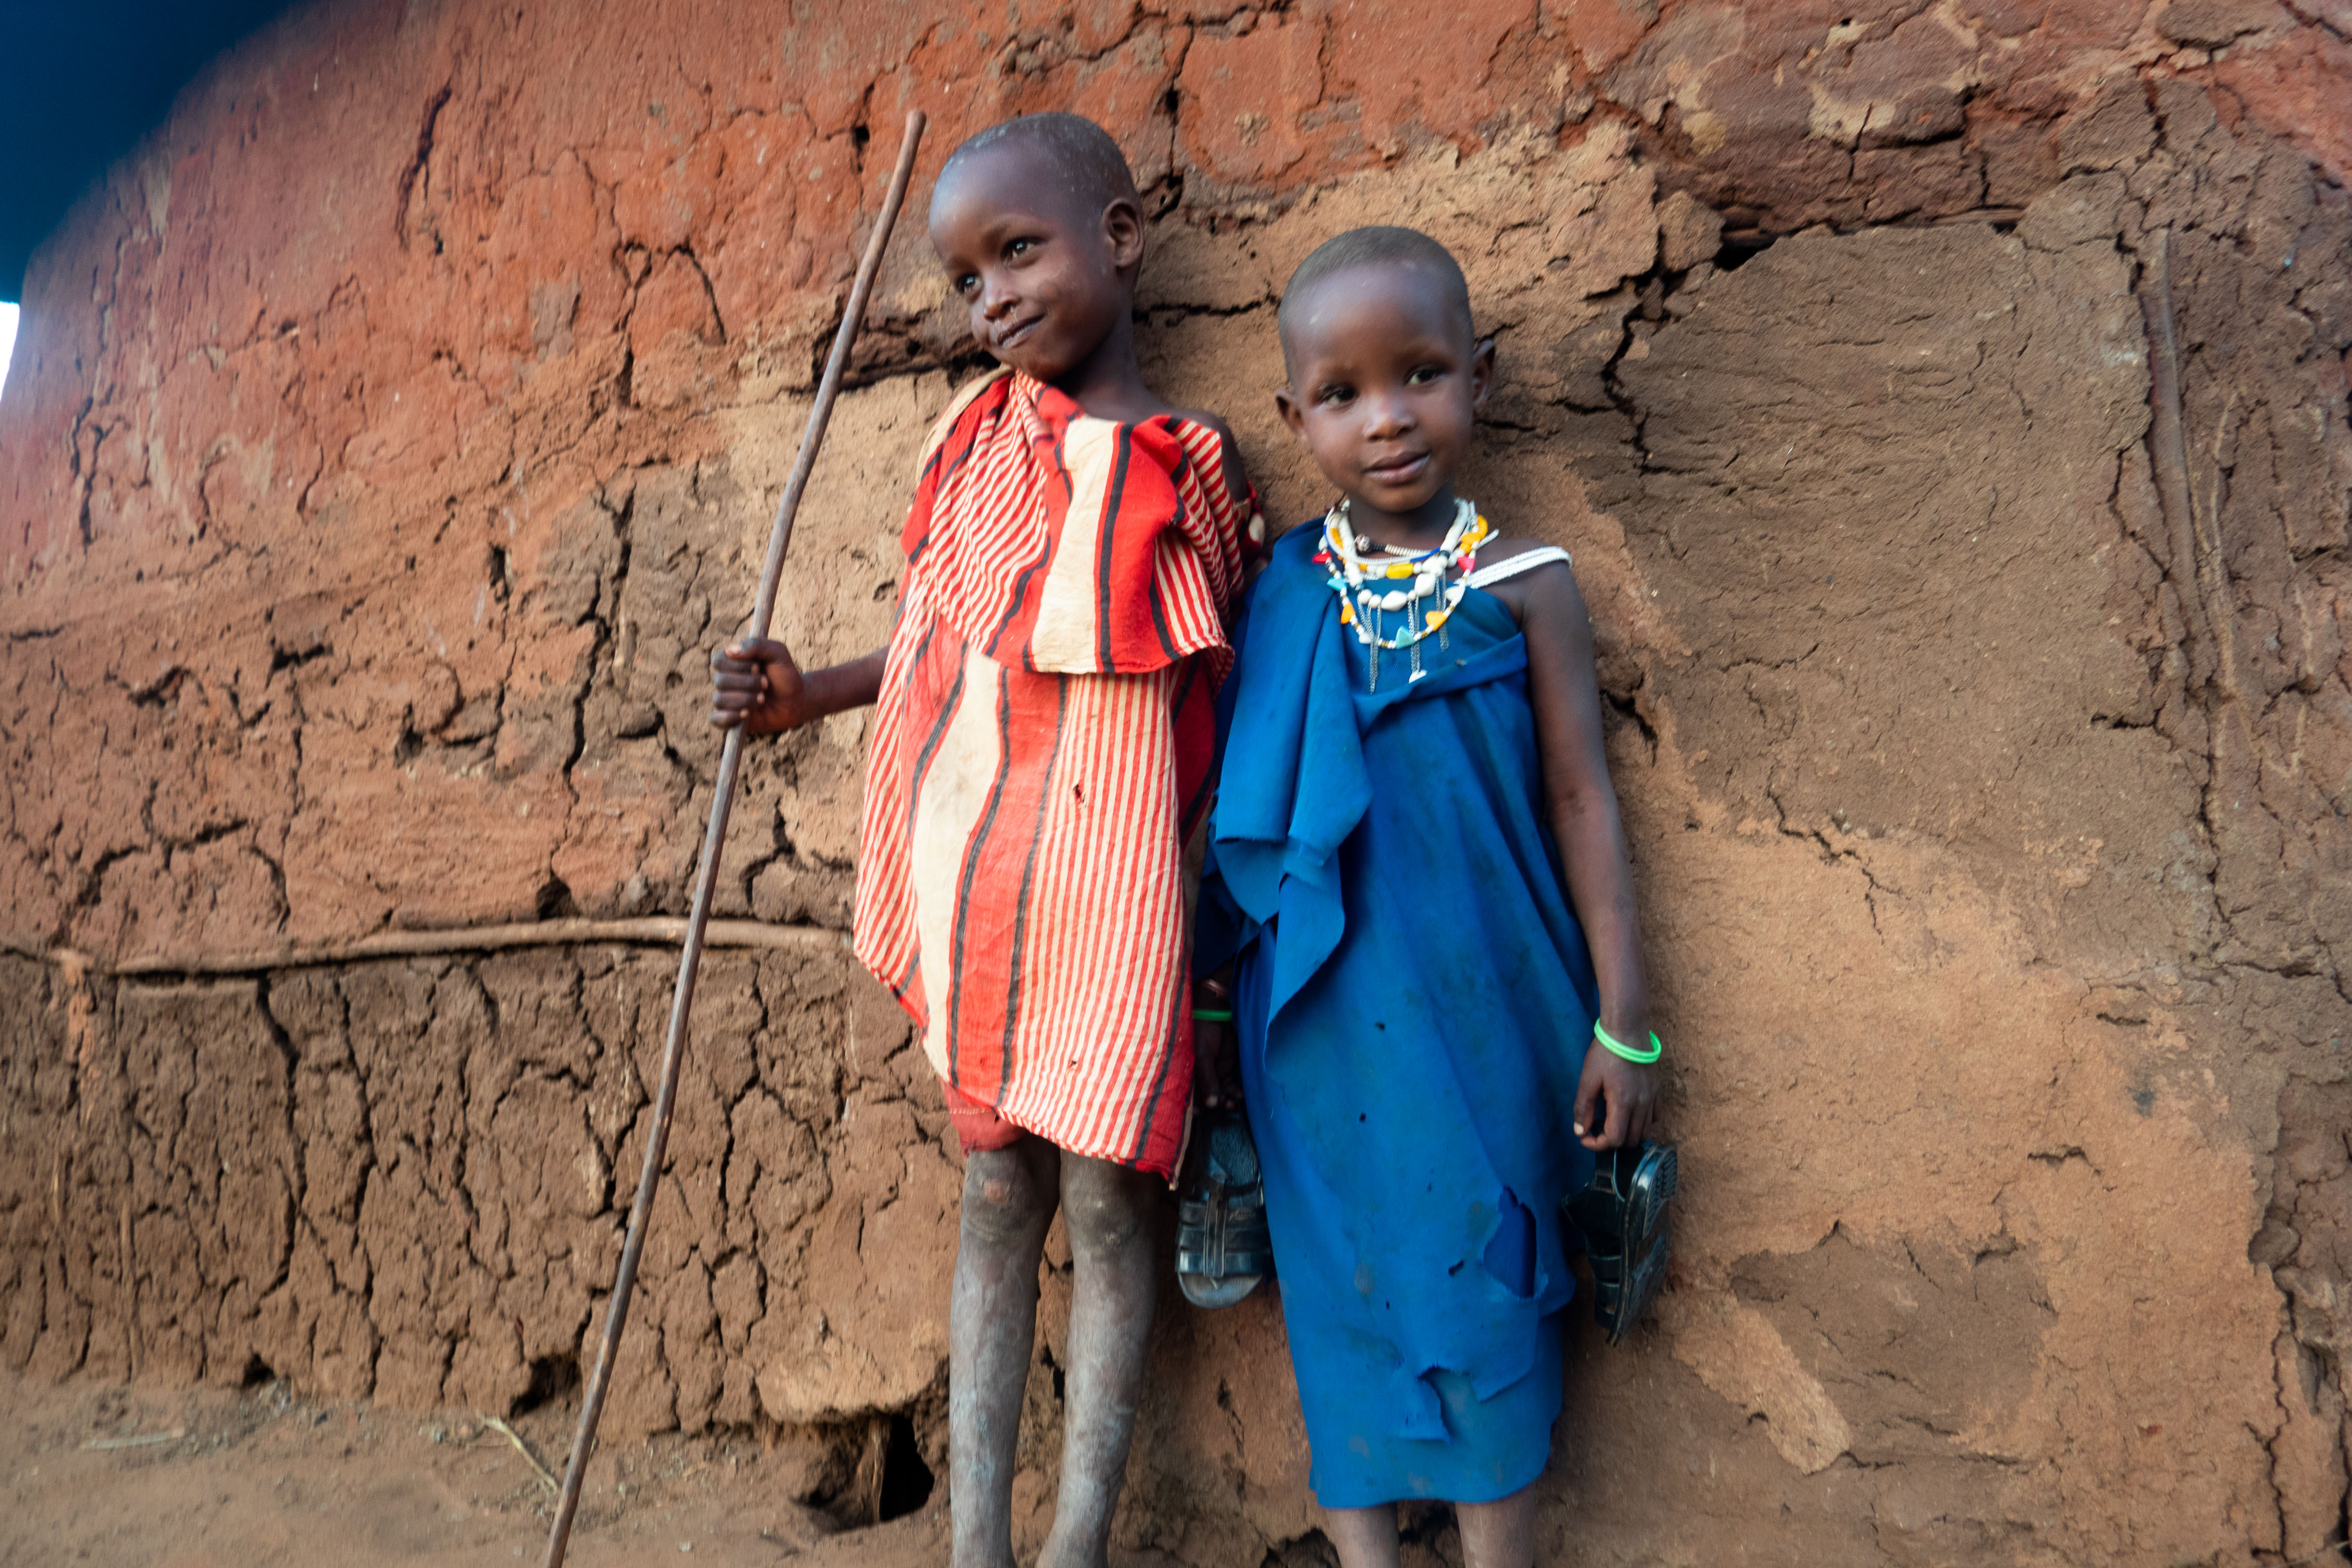 Brother and sister: Kimani (L) and Nditolai (R) stand side by side outside of their family hut. Nditolai will learn to do household chores from her mother, while Kimani will herd cows until his circumcision ceremony, which will mark his entry into respected manhood. 